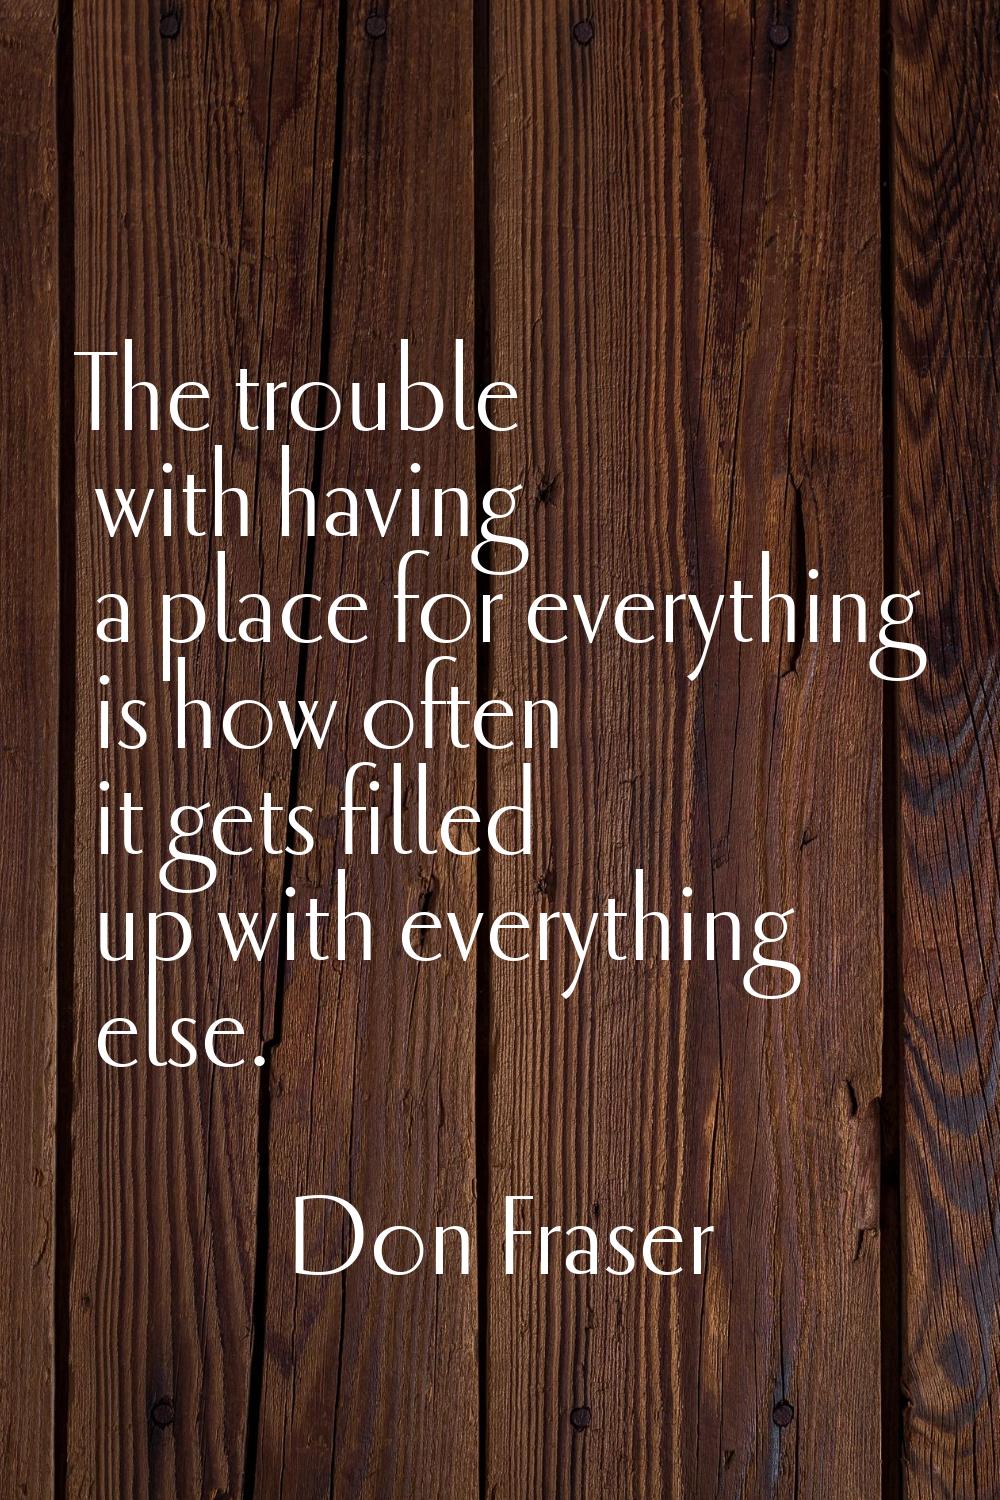 The trouble with having a place for everything is how often it gets filled up with everything else.